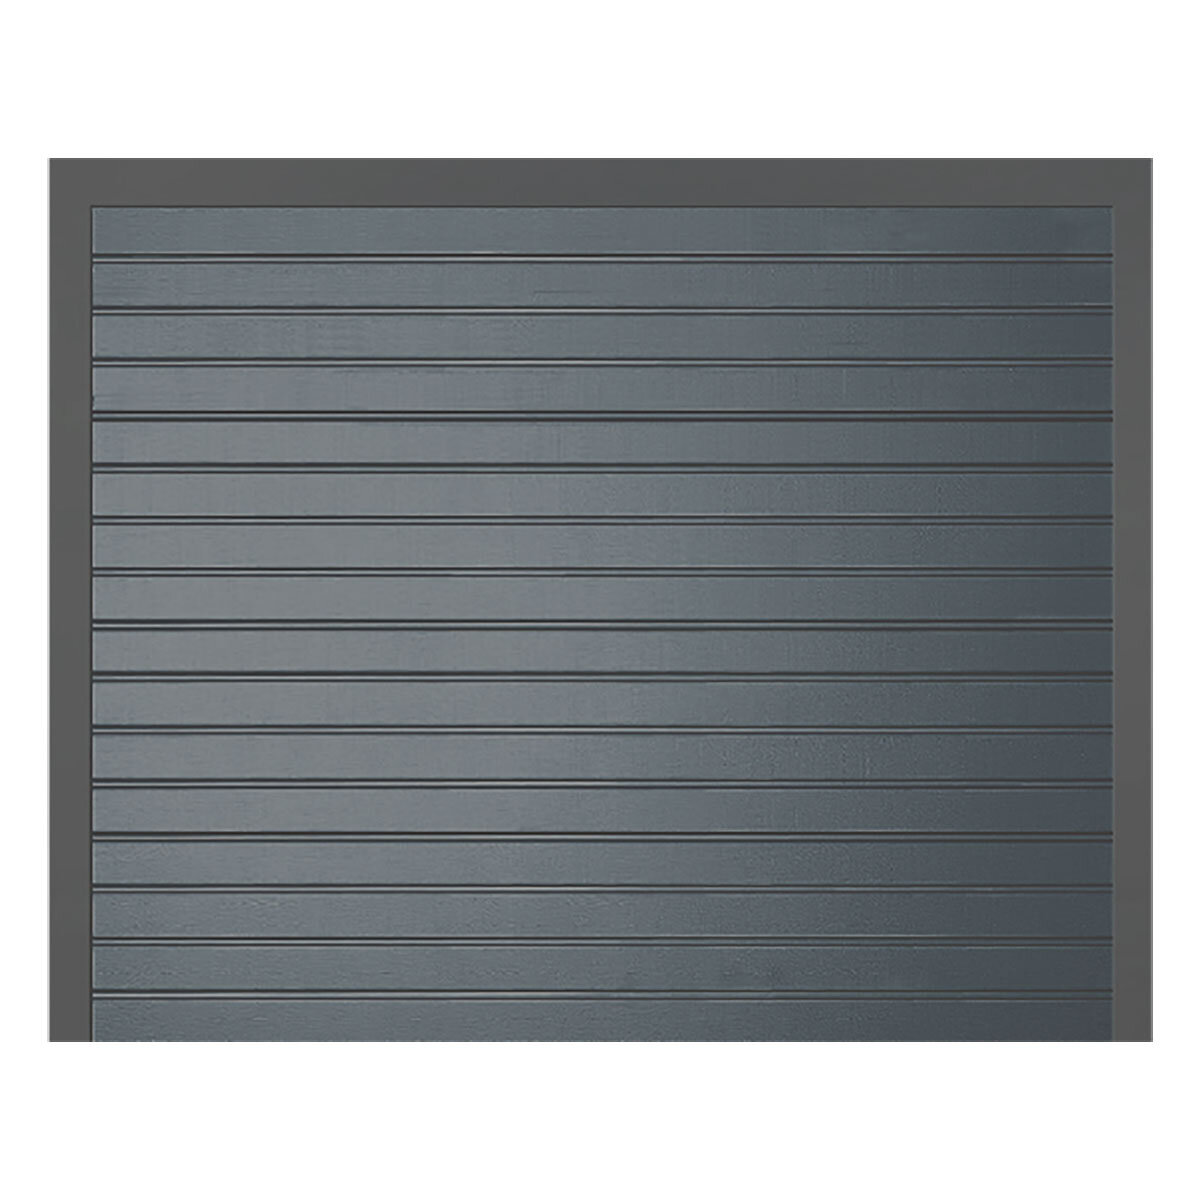 Cardale Electric Roller Door 77mm with Installation up to 2.5 metres width  in 3 Colours